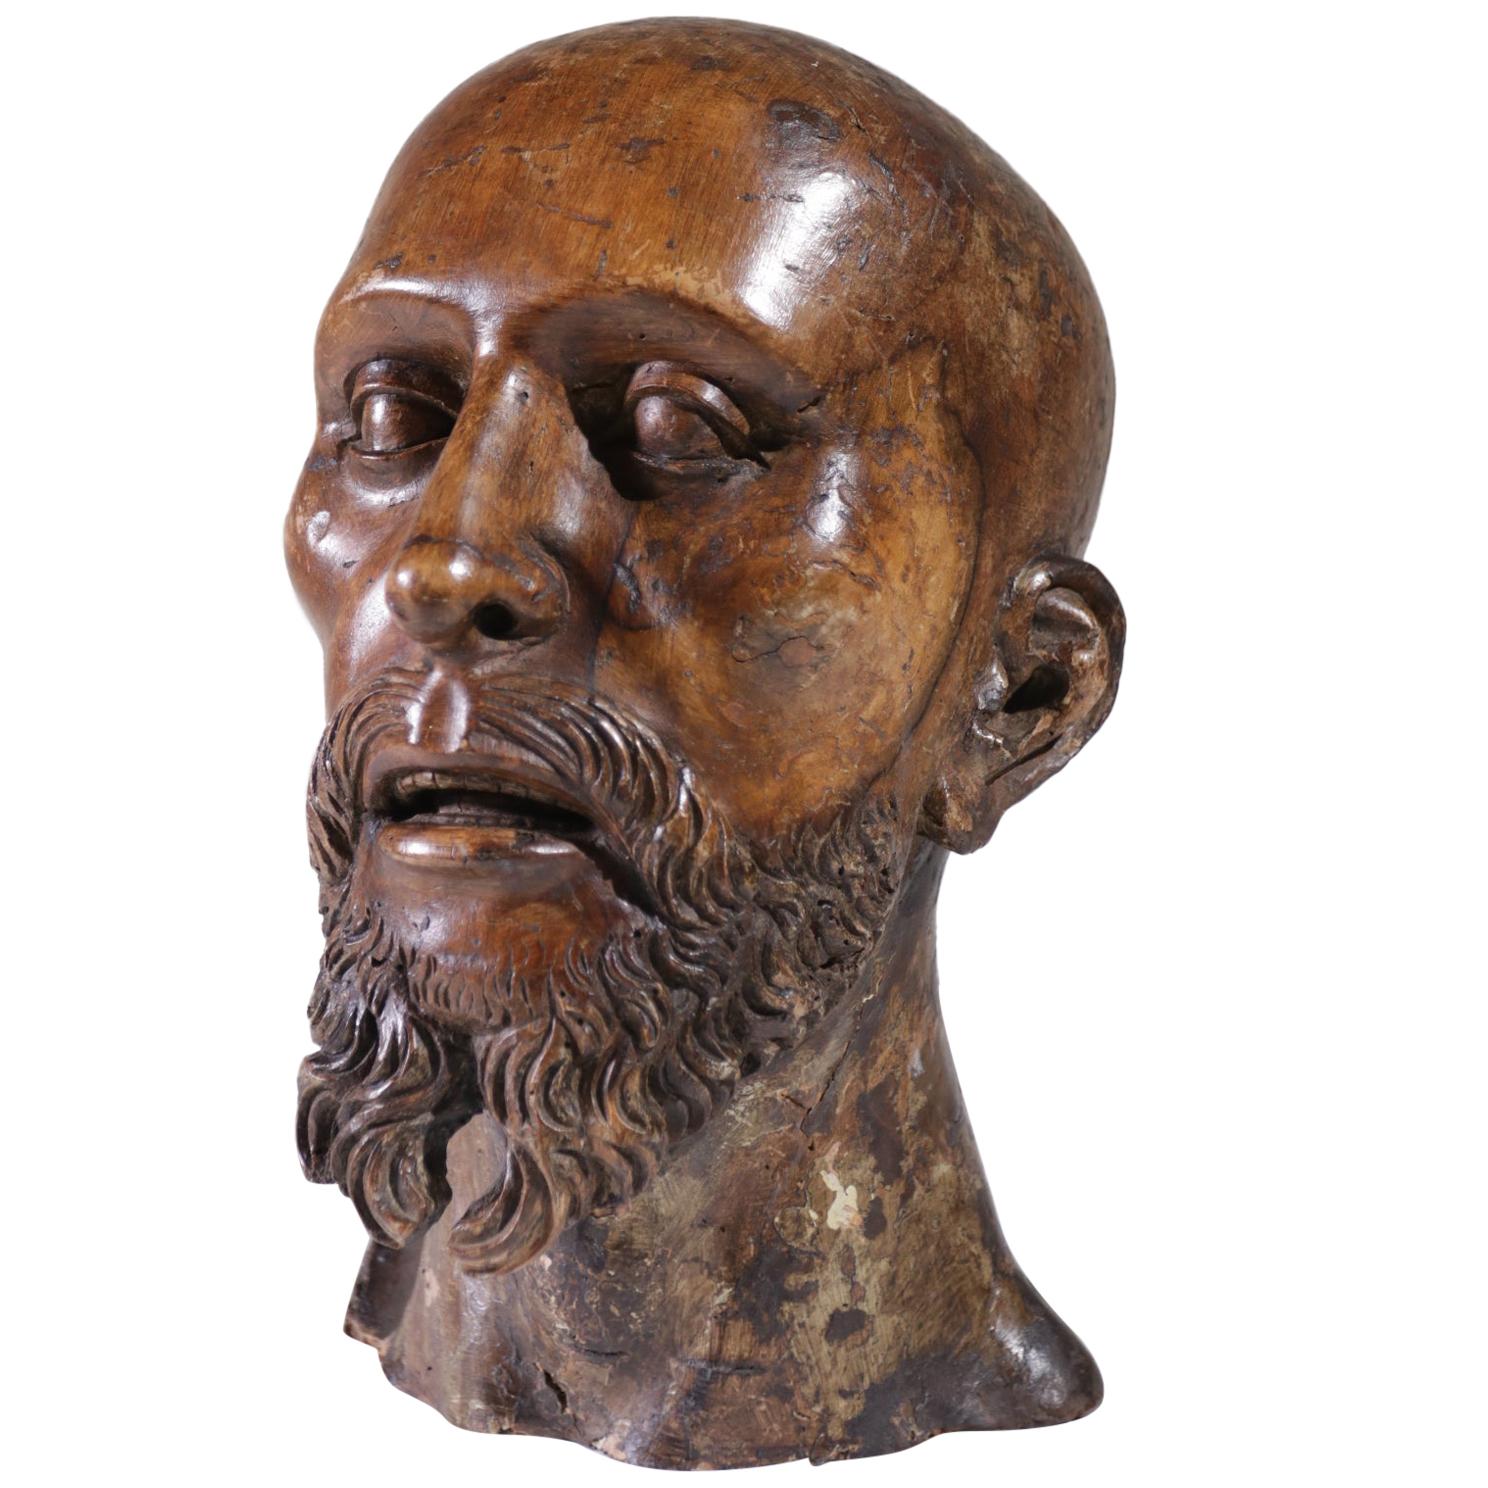 Life-Size Carved Wood Sculpture of a Man's Head circa 1700 South European